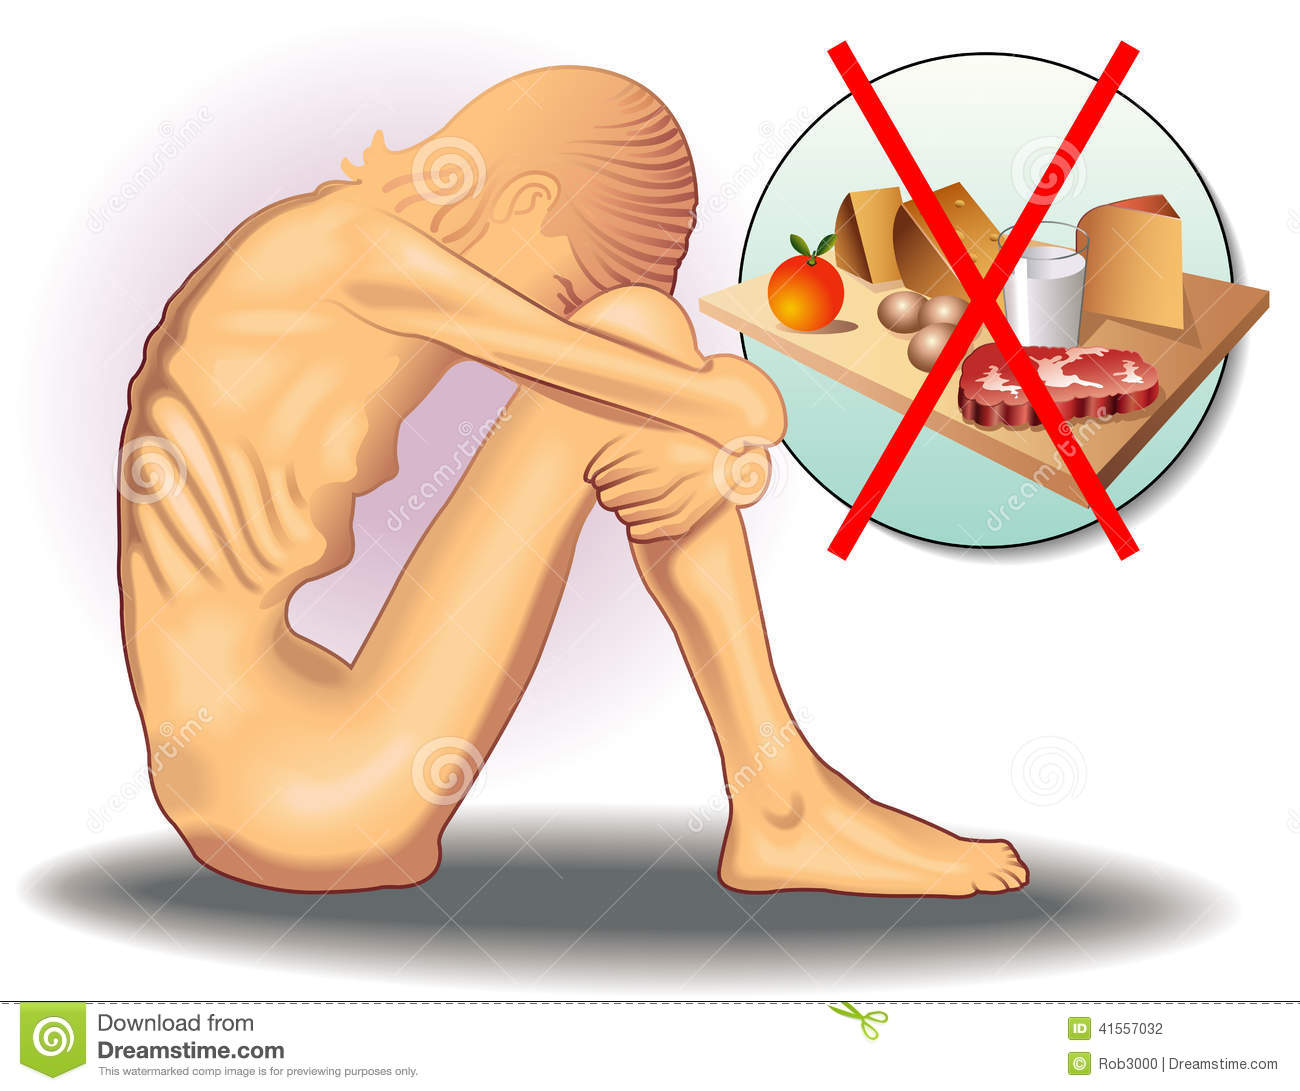 Eating Disorder Clipart.